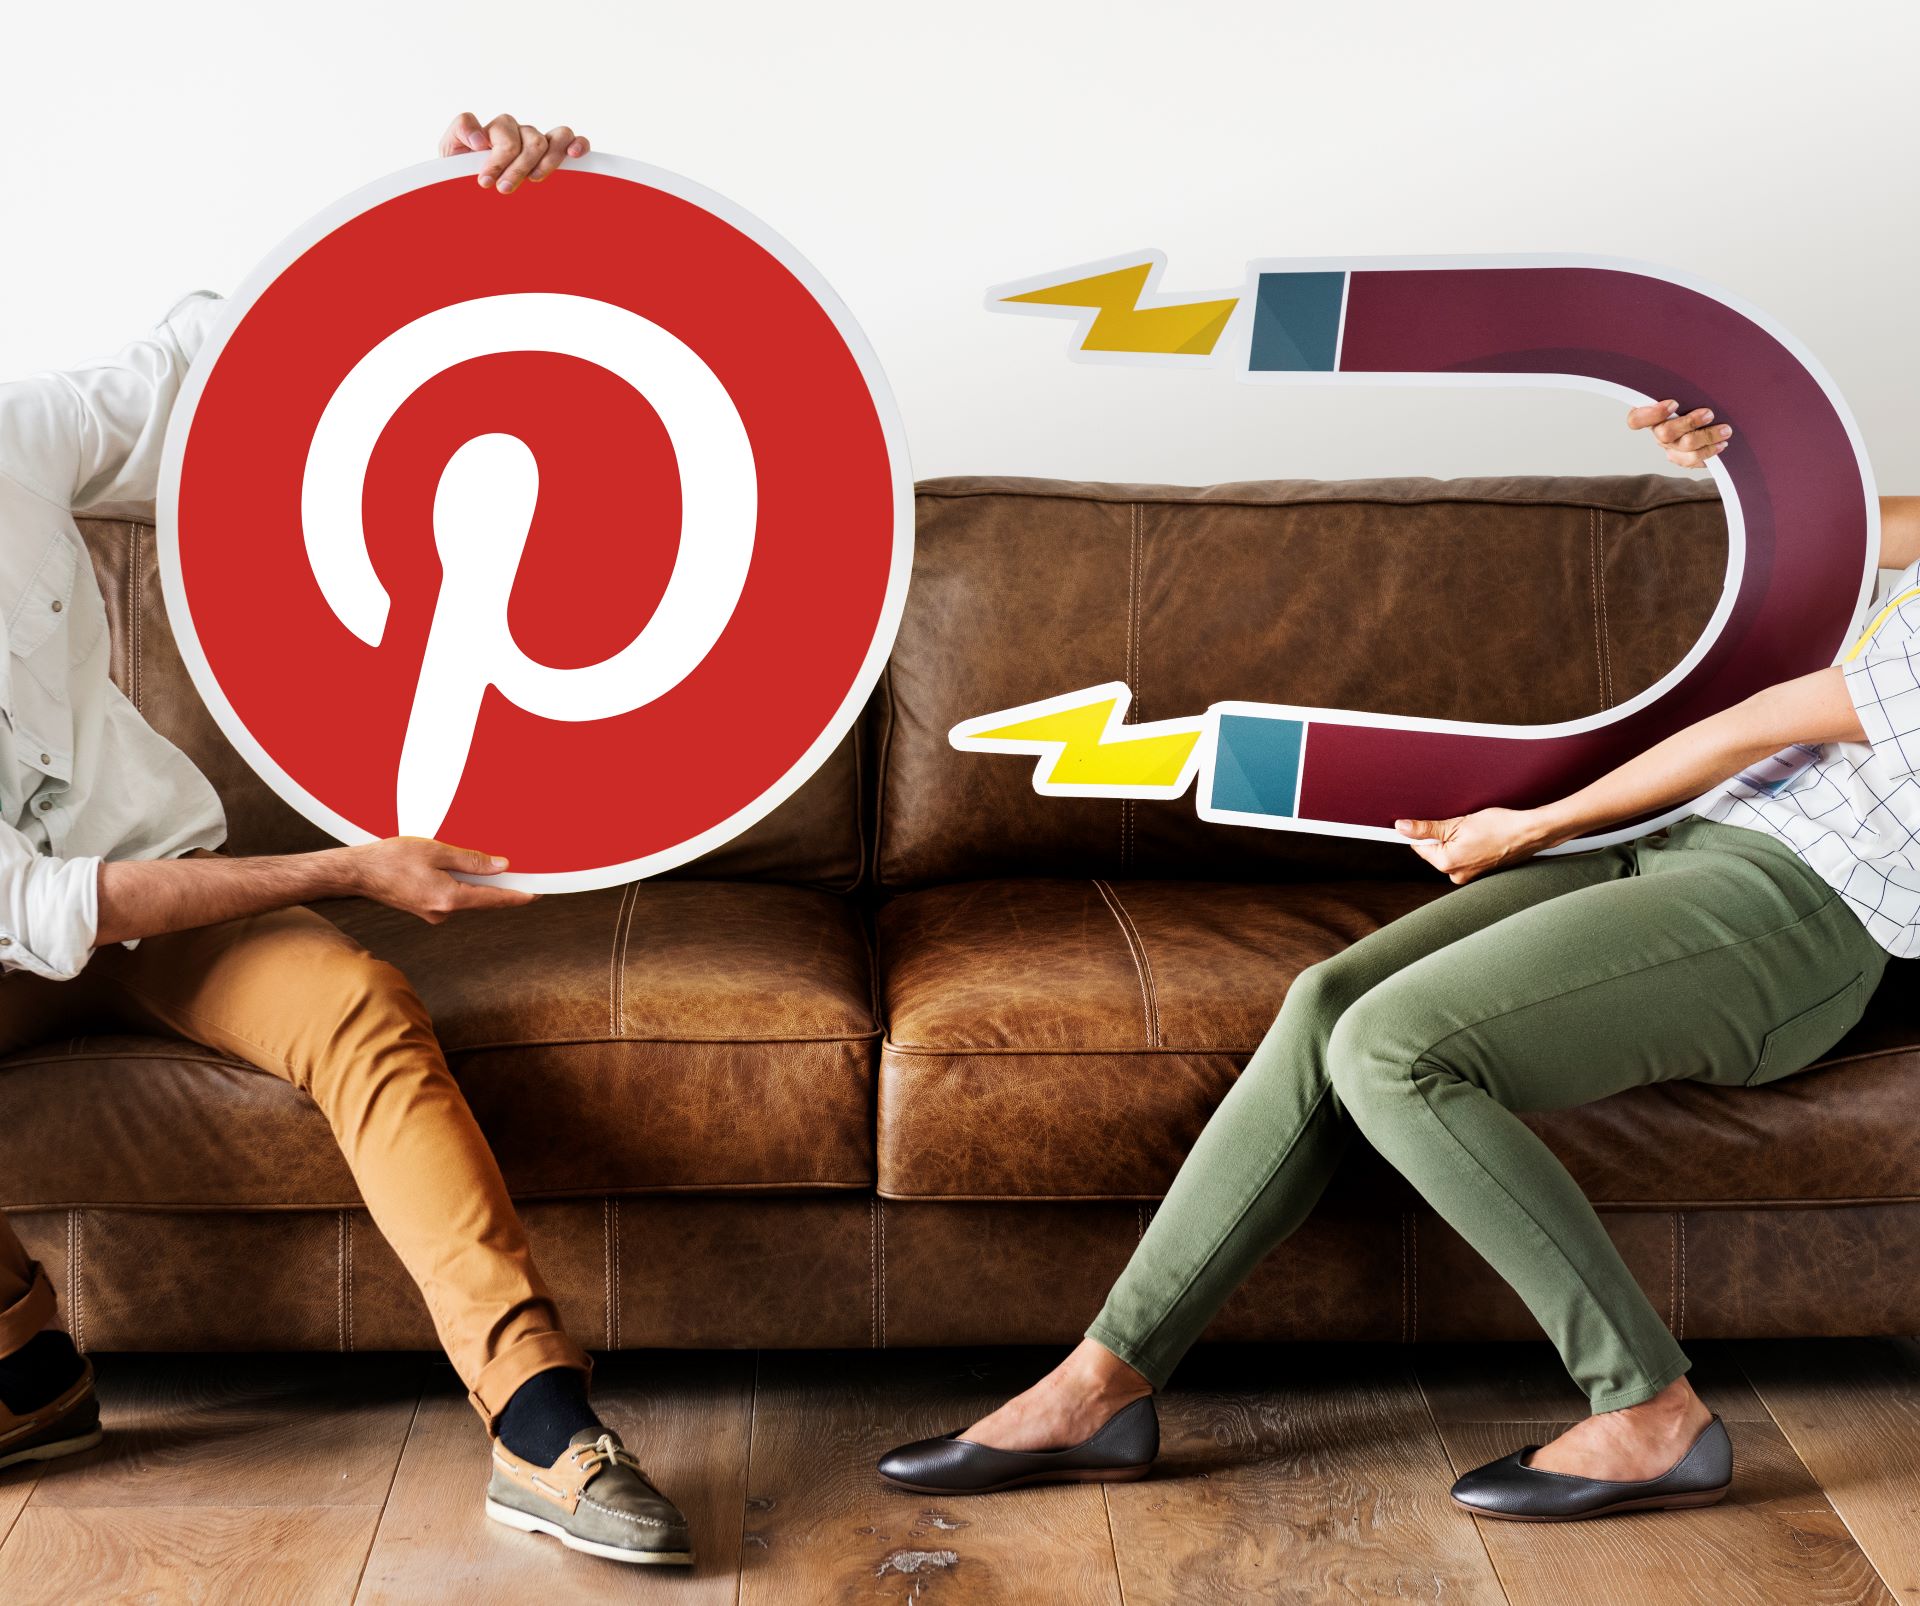 Pinterest Makes Max Width Promoted Videos Available to All Advertisers